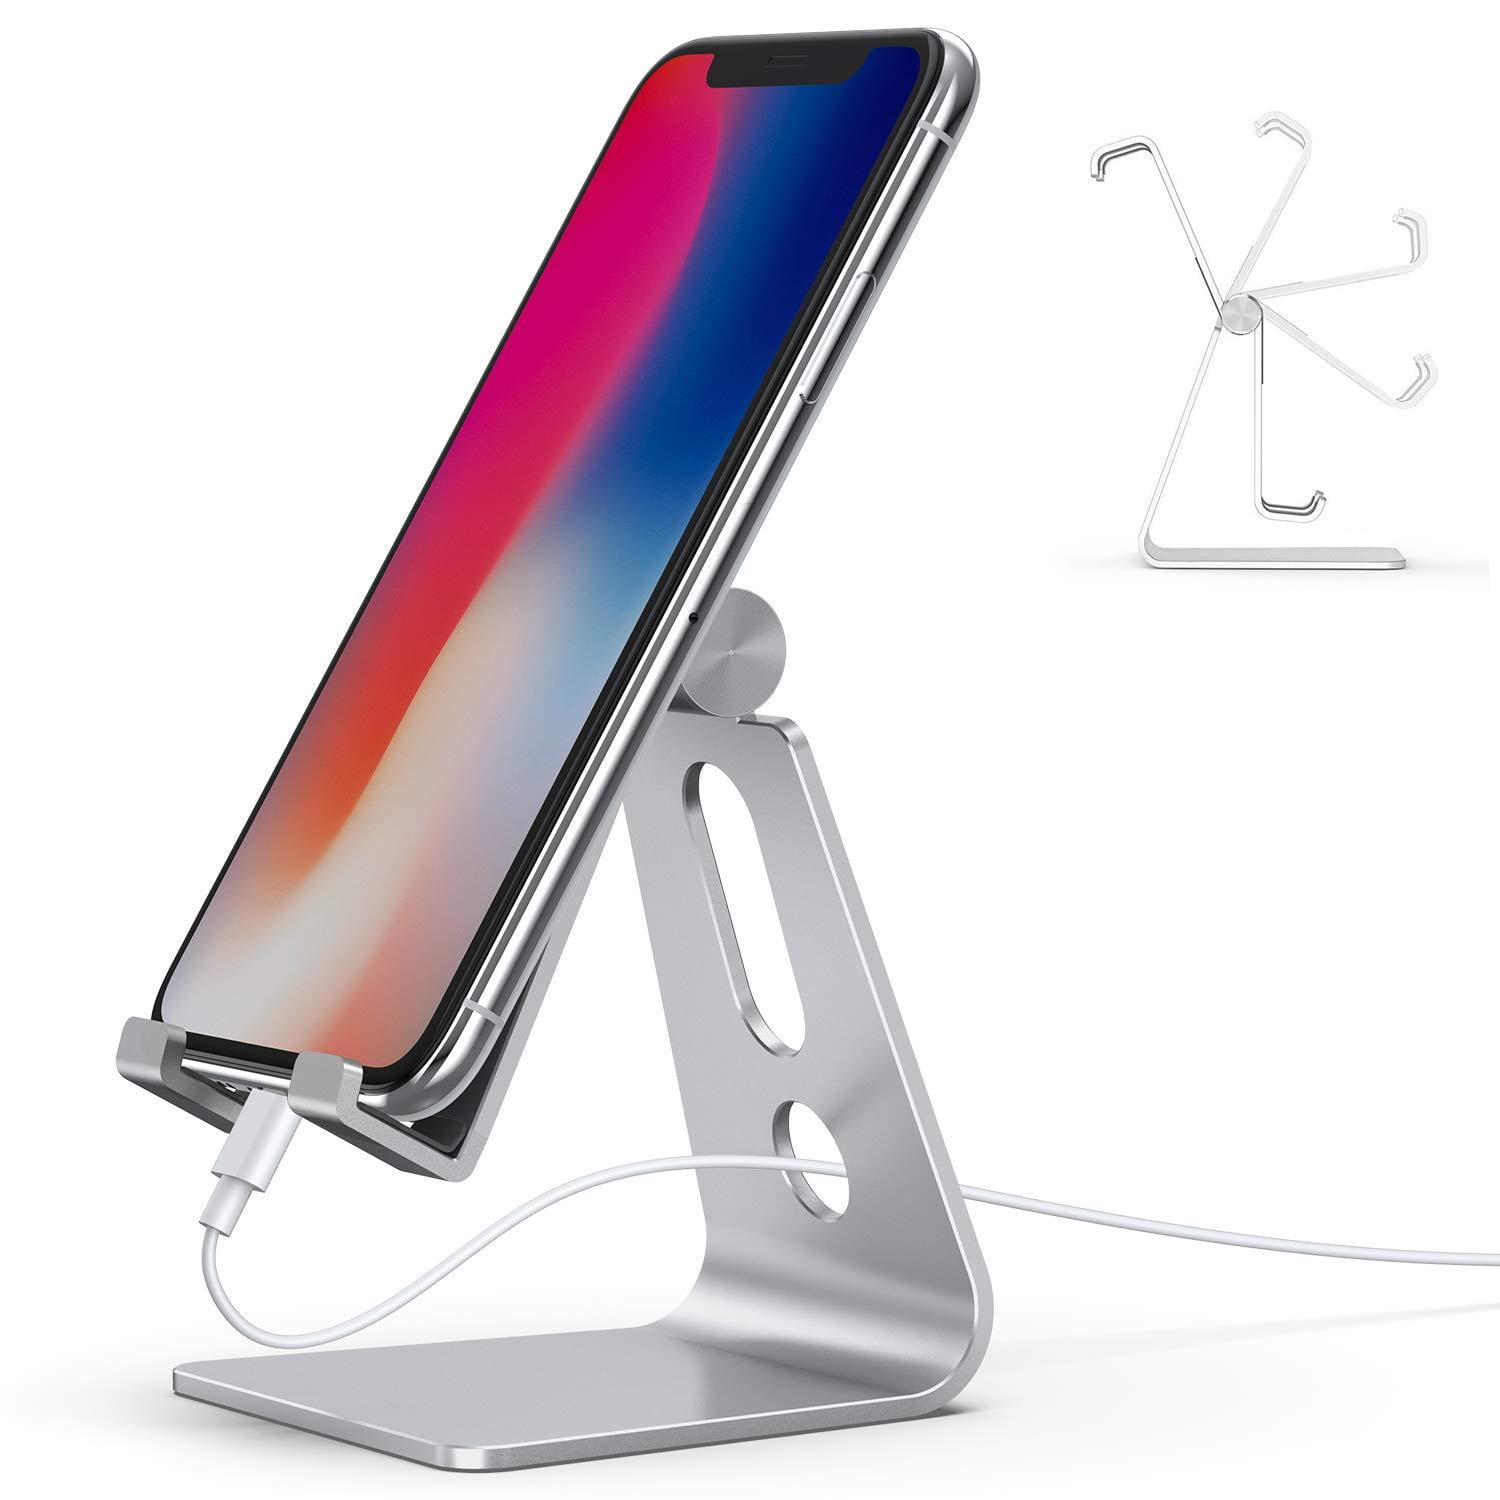 Adjustable Cell Phone Stand, Lamicall Phone Stand: Version] Dock, Holder Compatible with iPhone Xs XR 8 X 7 6 6S Plus SE 5 5S Charging, Accessories Desk, Android Smartphone - Silver - Walmart.com